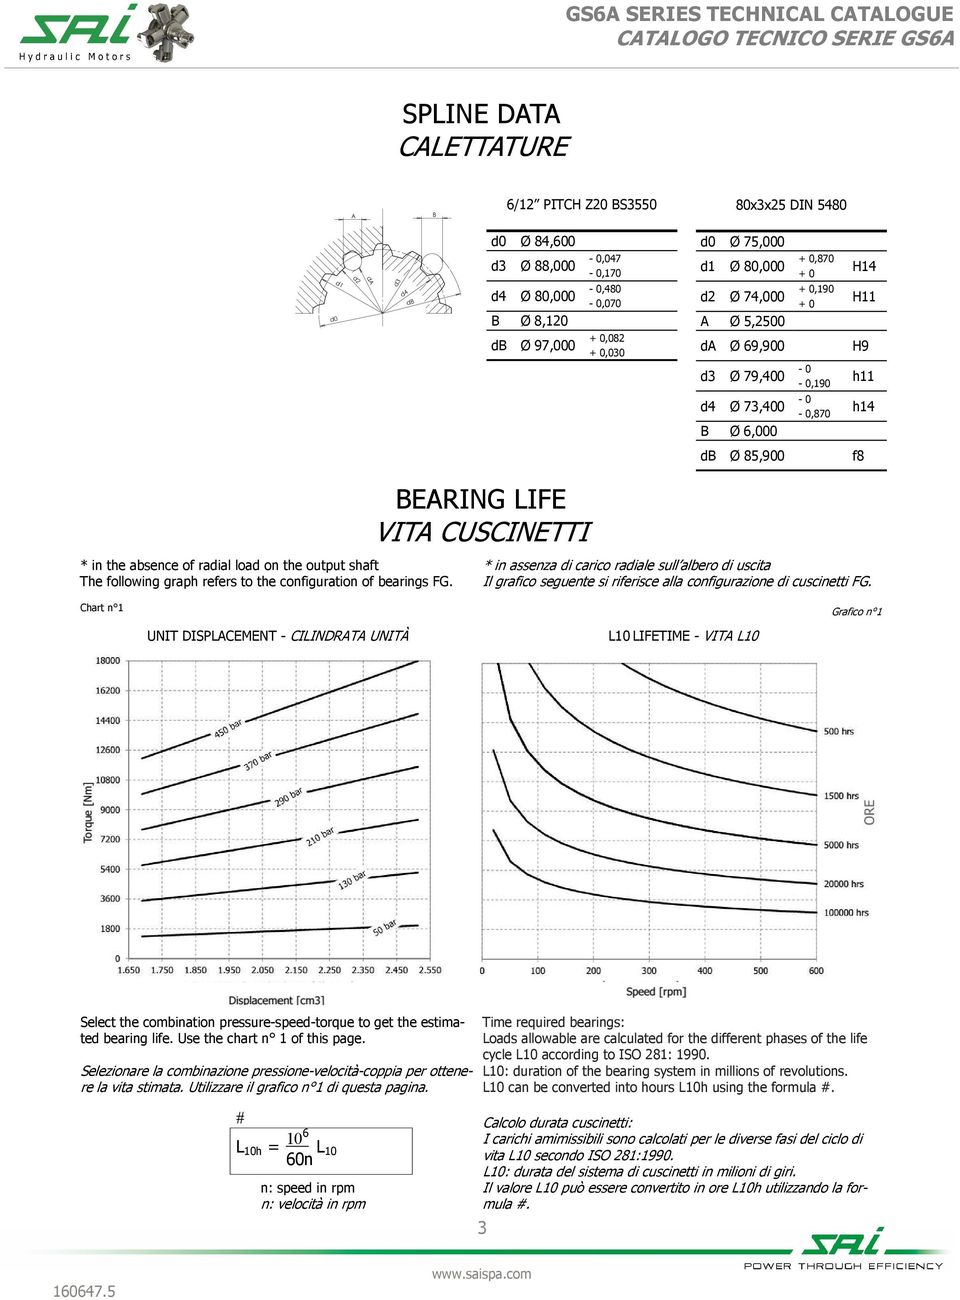 graph refers to the configuration of bearings FG.